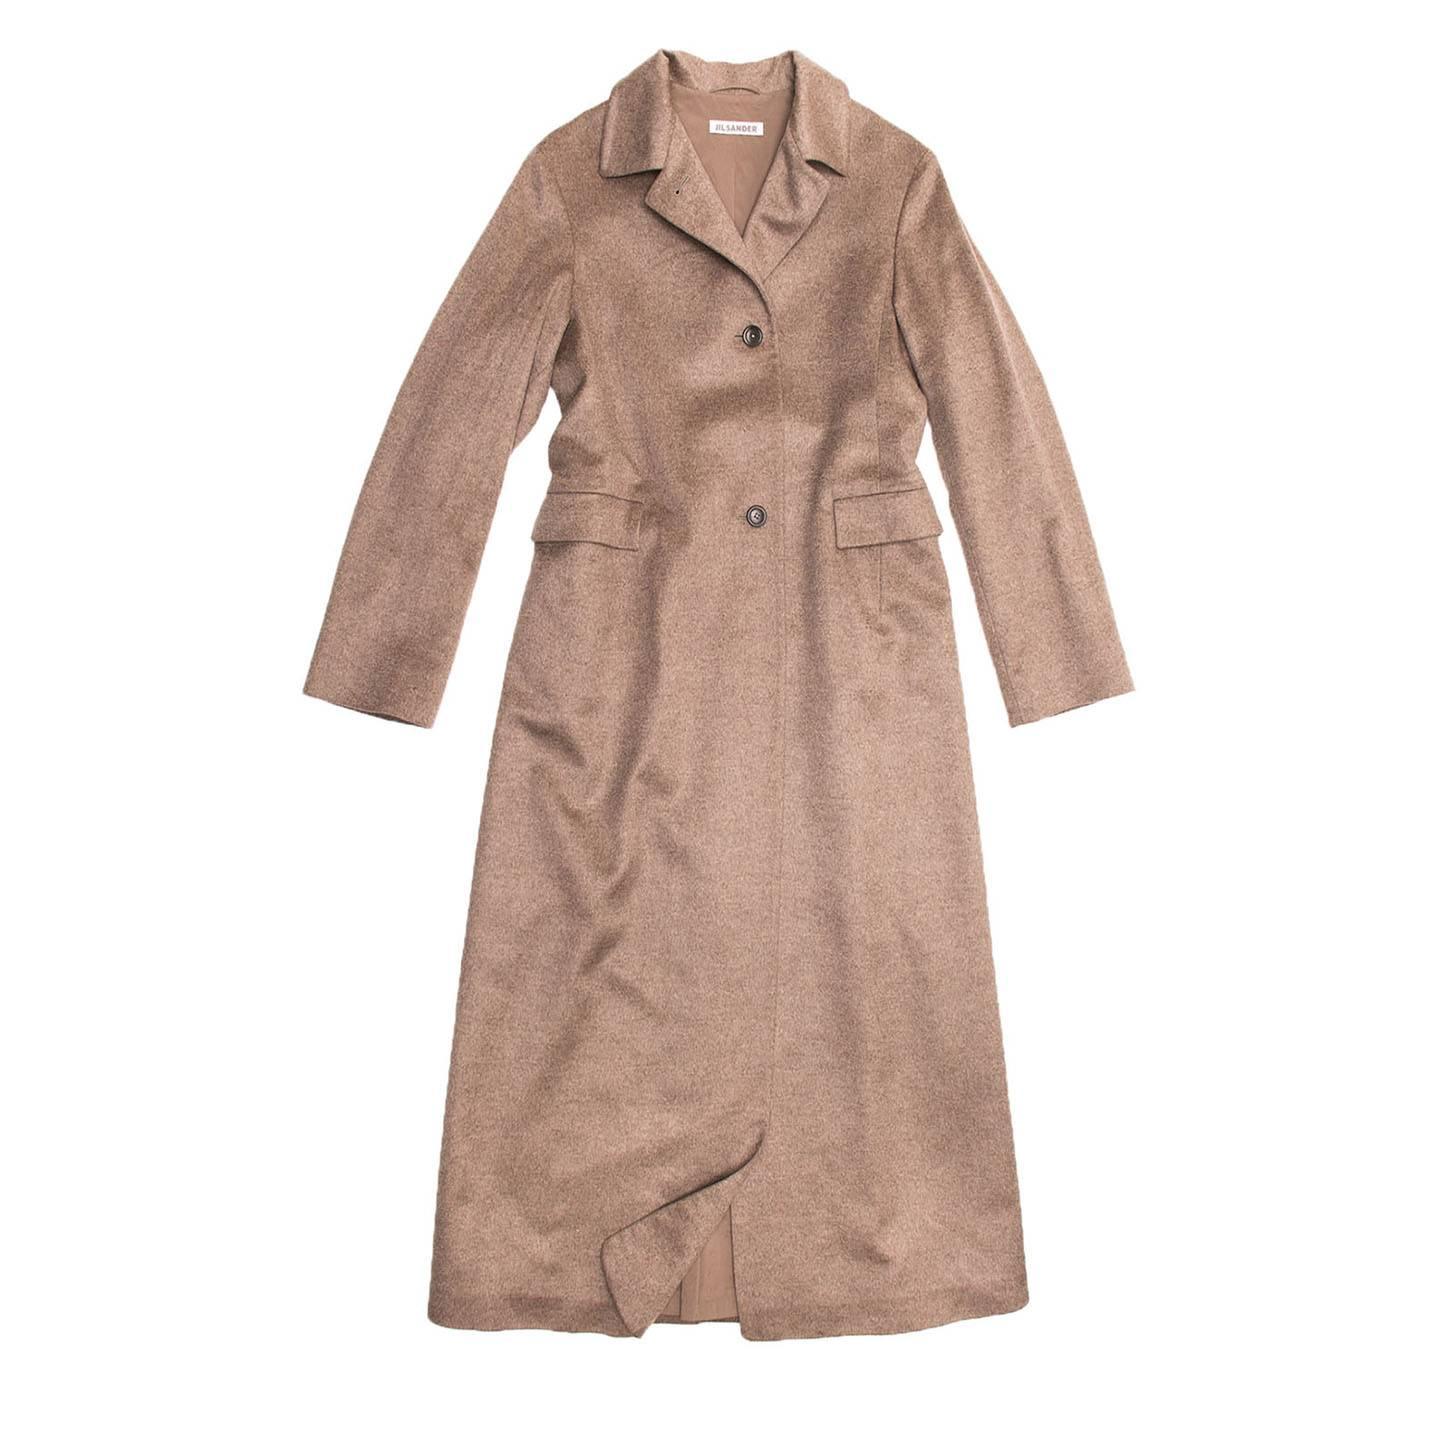 Camel color, cashmere and mink hair floor length coat. Convertible collar which can be worn open or closed, on a single breasted closure with three dark brown buttons. Two front pockets with squared flaps. Adjustable belt visible only at